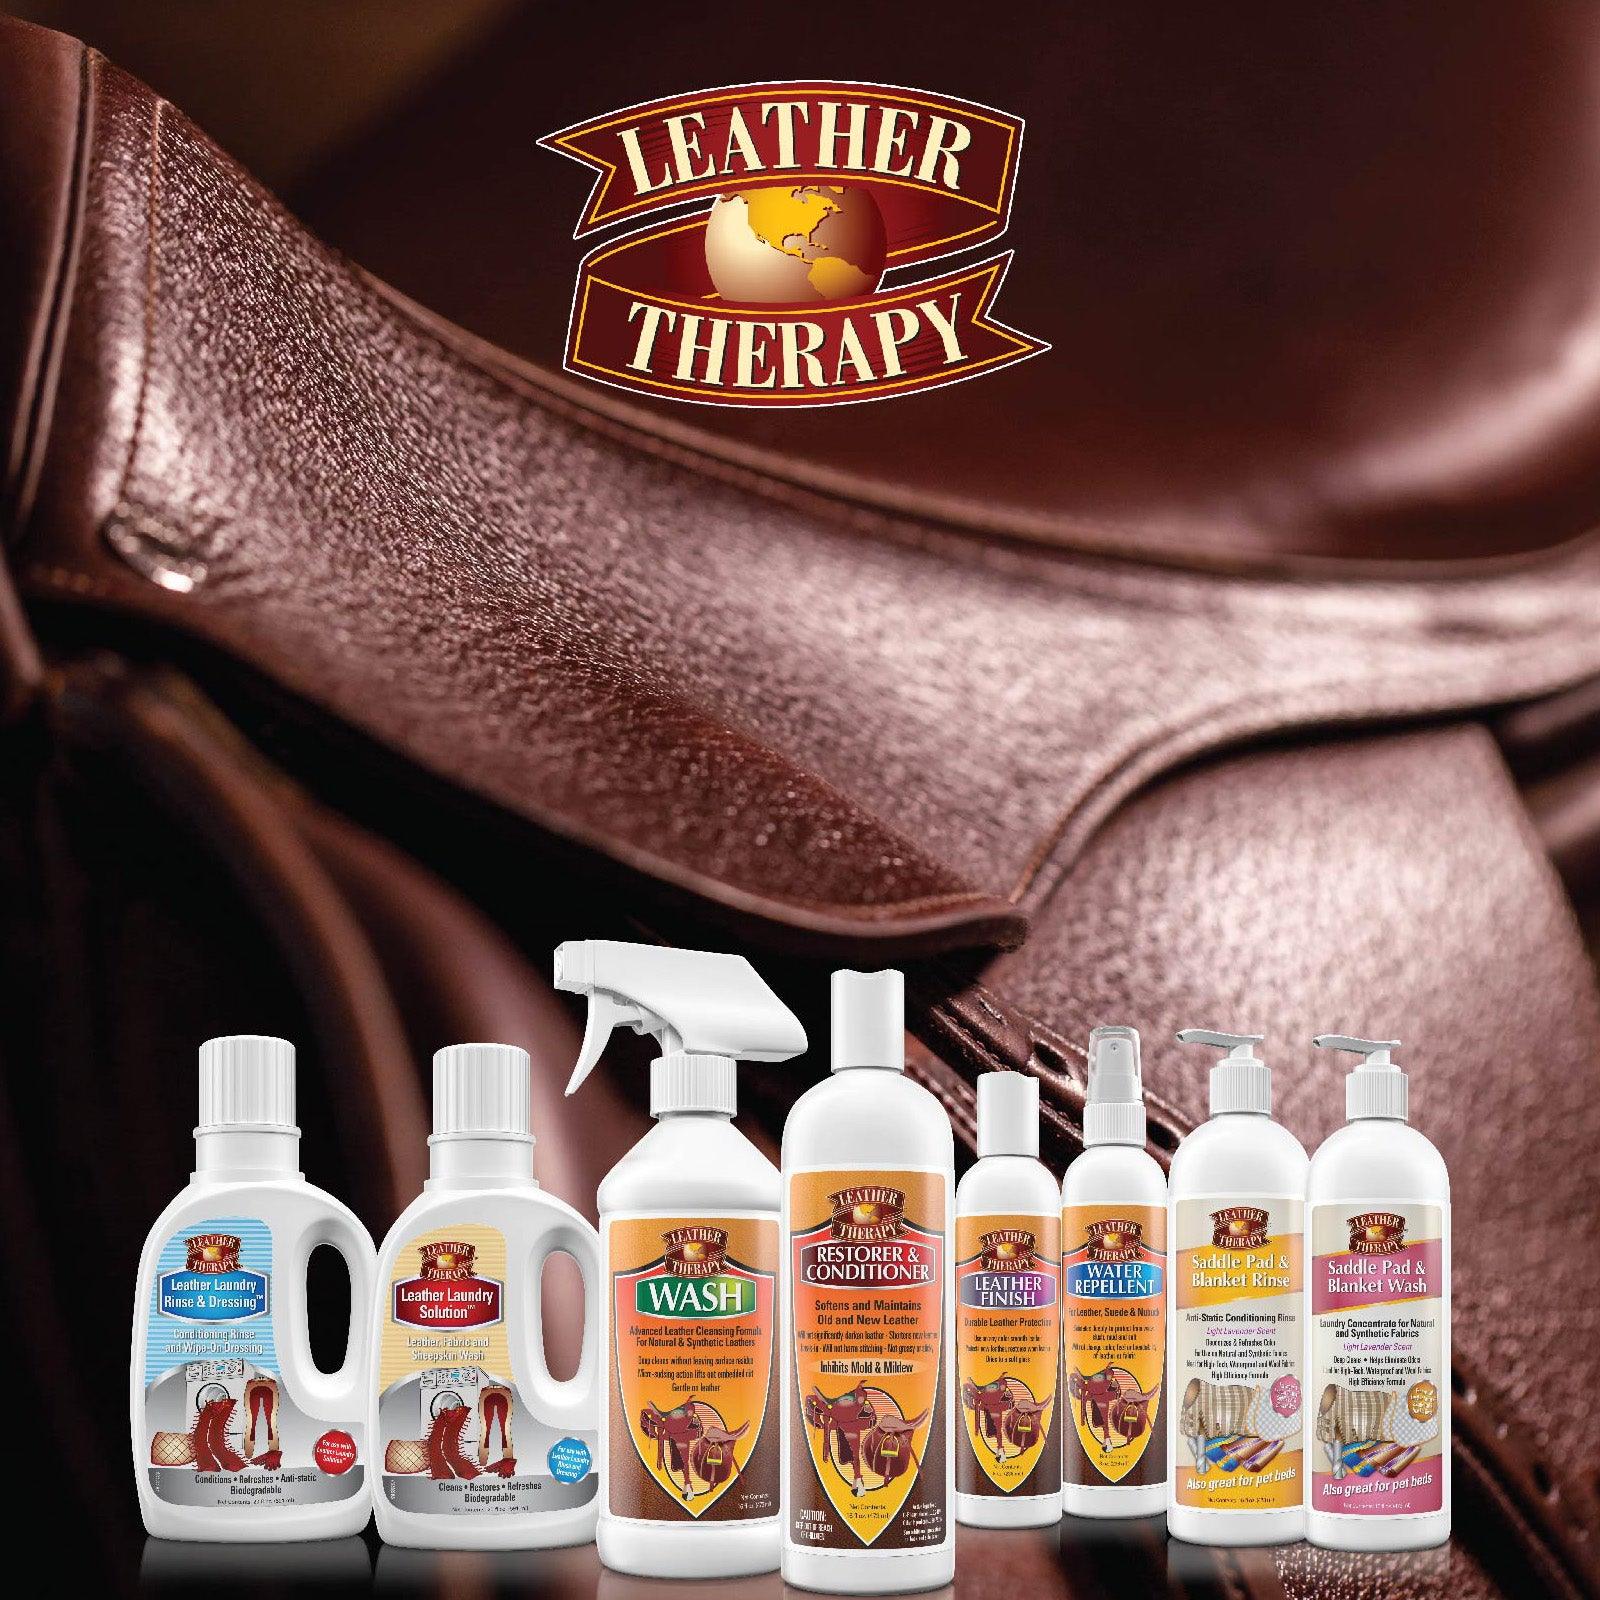 Leather Therapy line of products. Leather laundry rinse & conditioning, leather laundry solution. Leather Therapy wash, restorer and conditioner, leather finish, water repellent. Saddle pad & blanket rinse, saddle pad & blanket wash. All of our product sitting in front of a freshly Leather Therapy treated saddle.